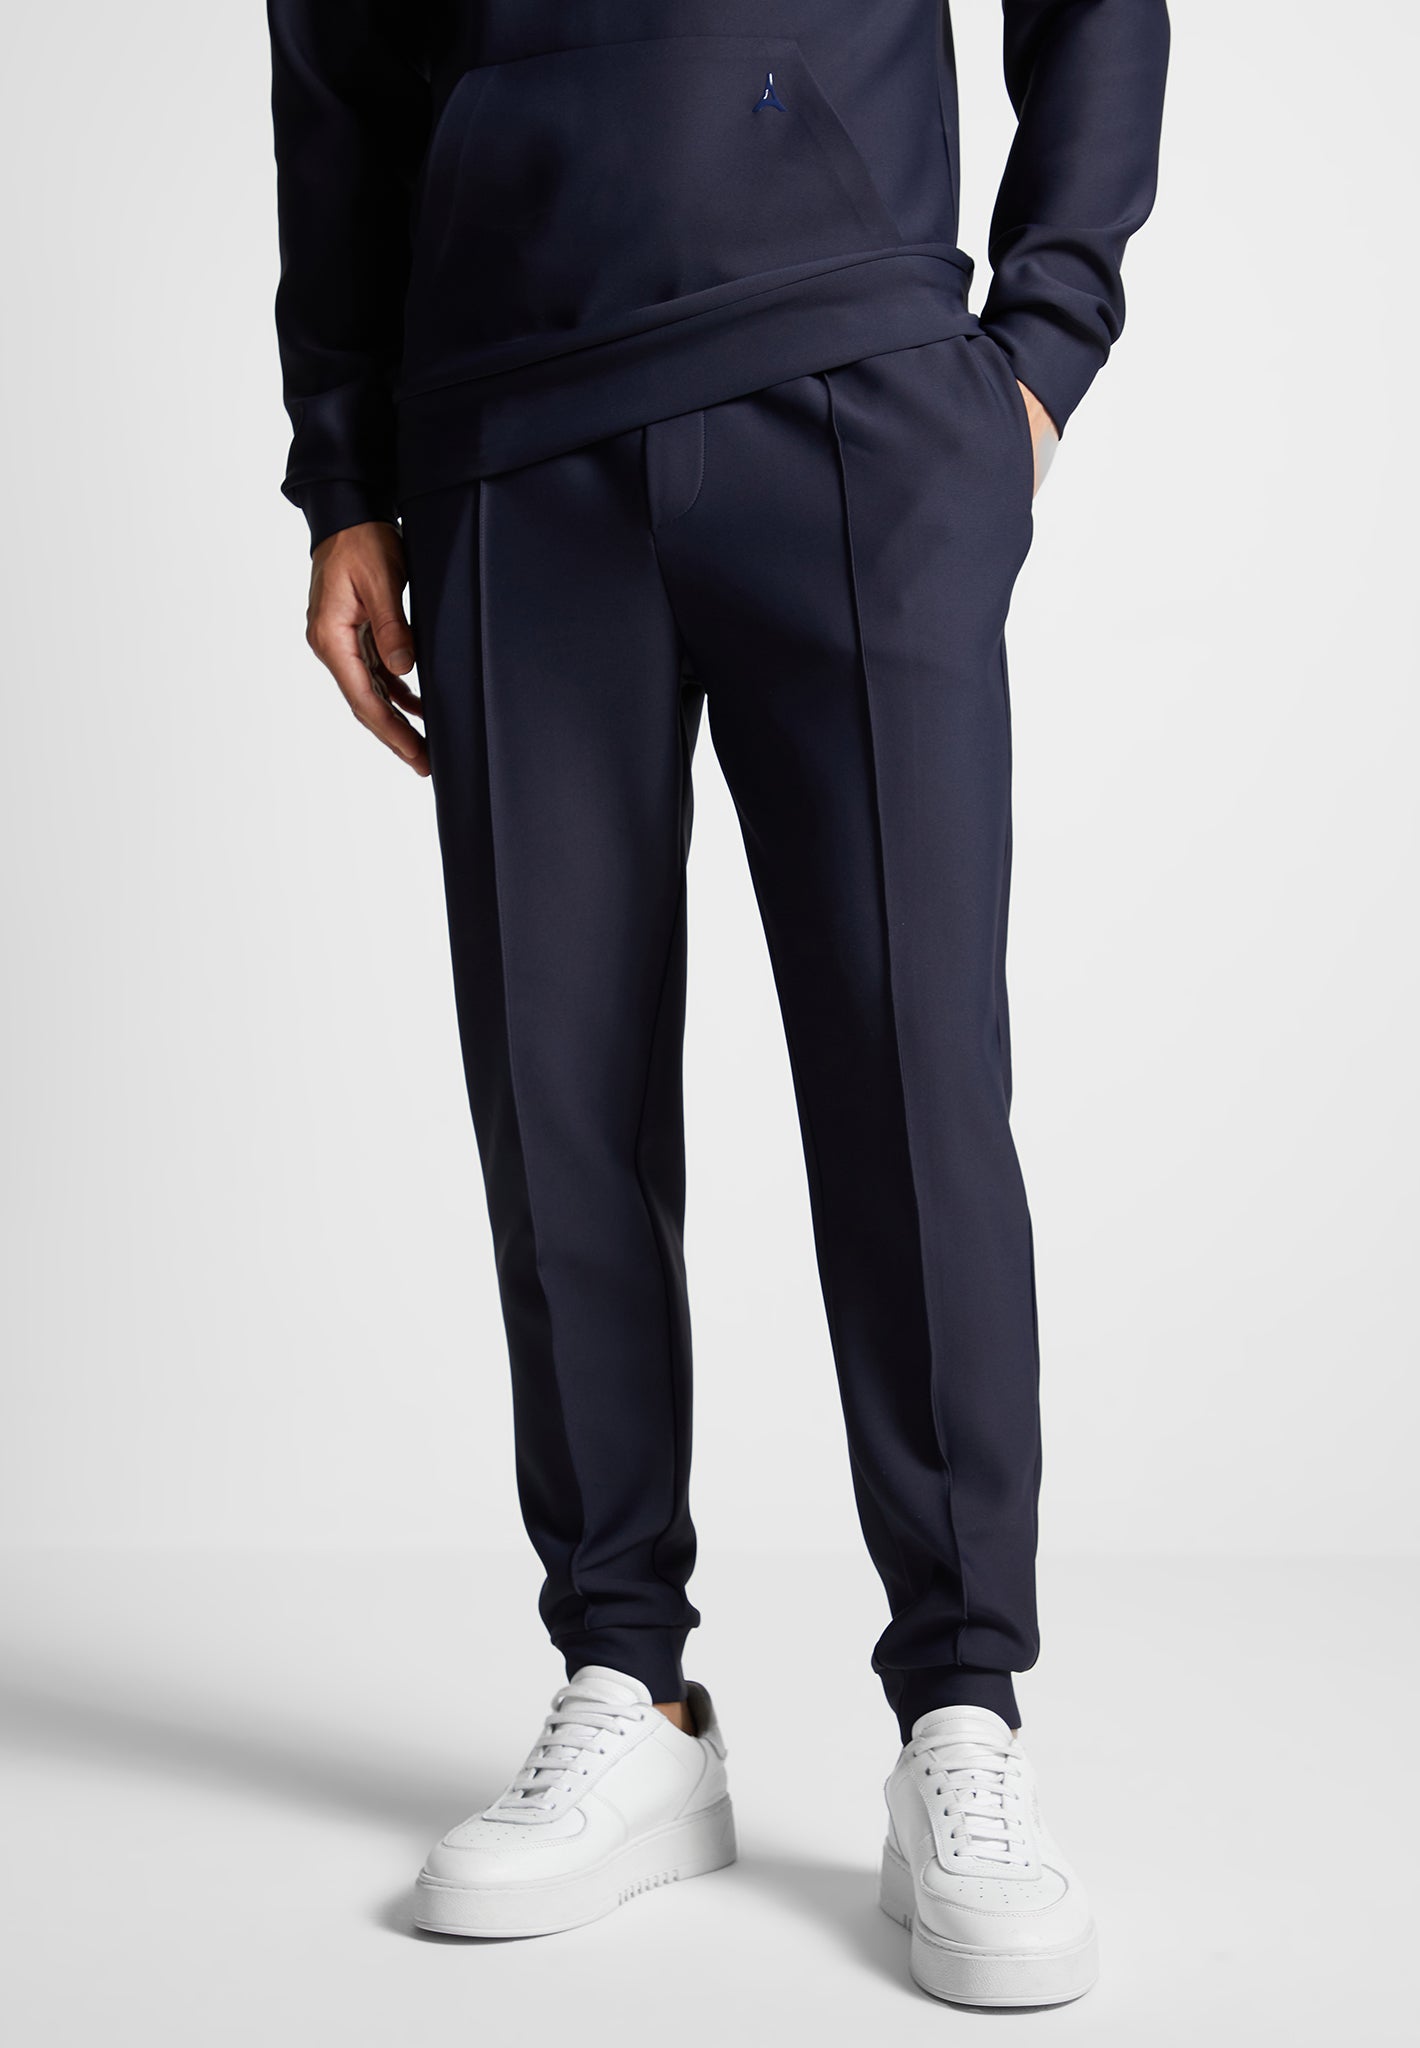 neoprene-tapered-fit-pintuck-joggers-navy